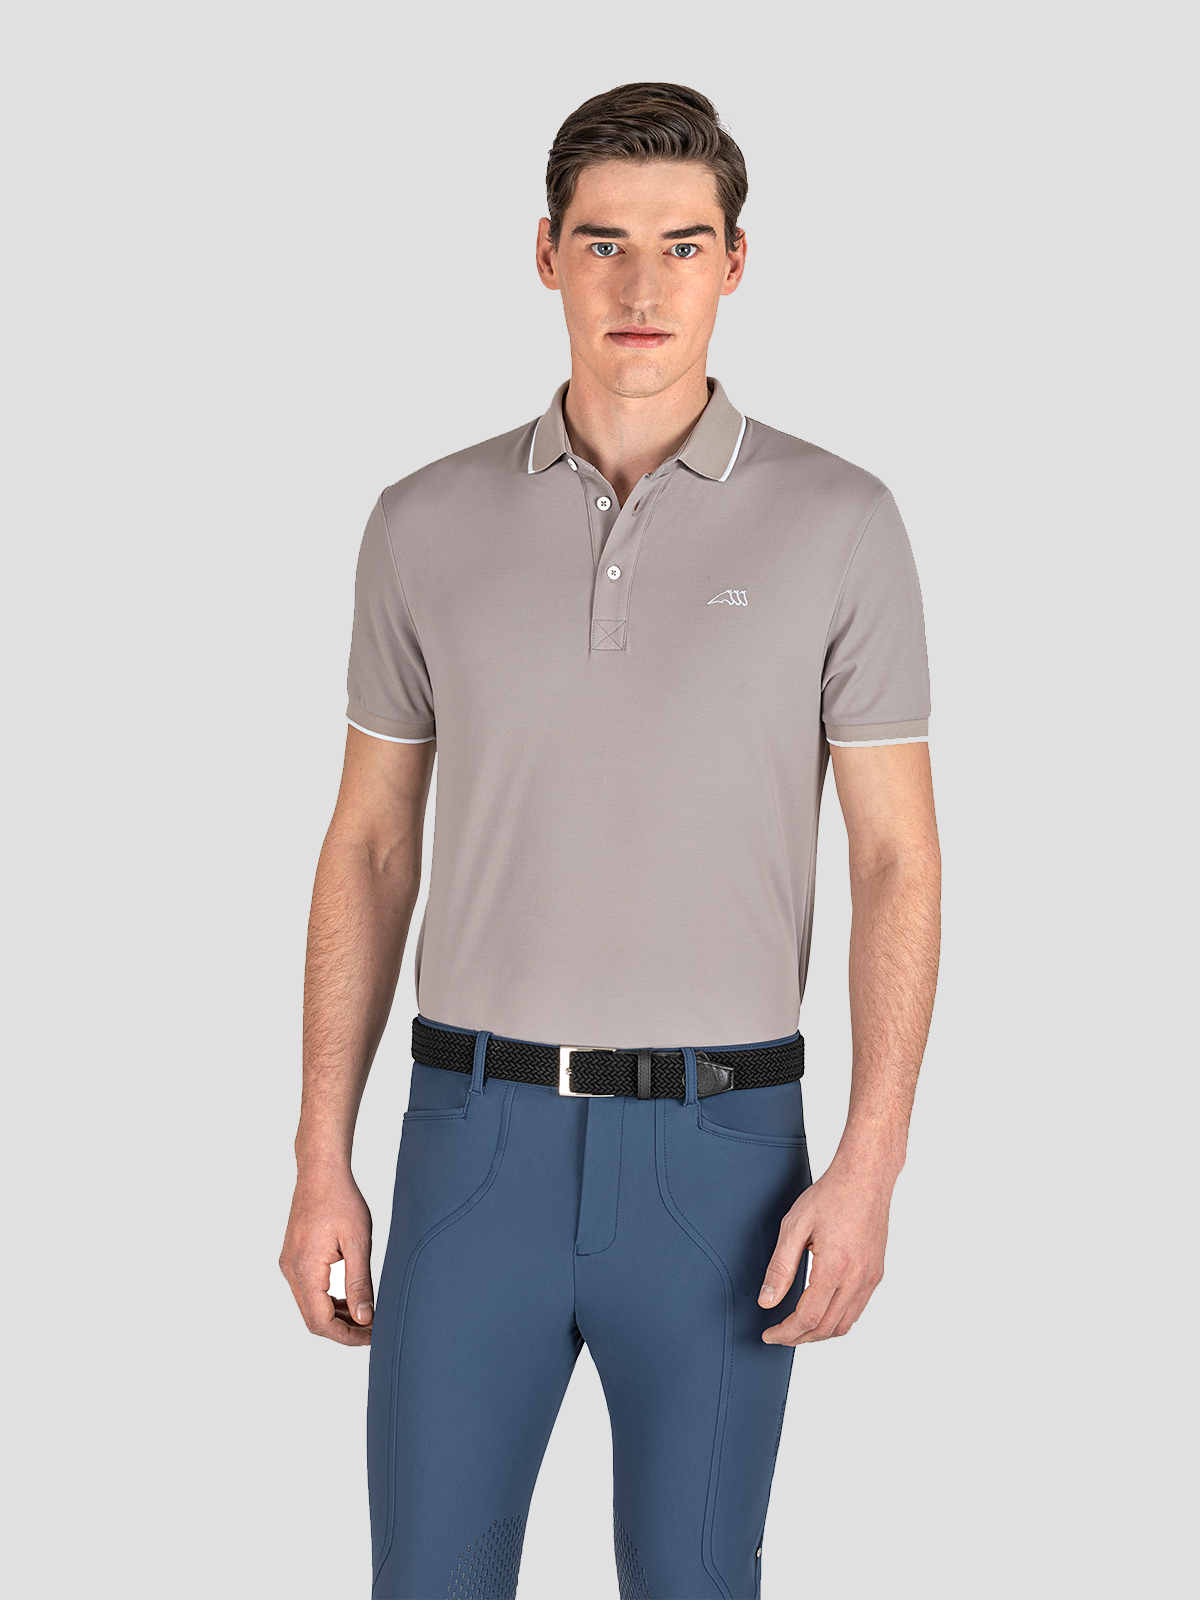 Eliae Short Sleeve Men's Polo Shirt - front view